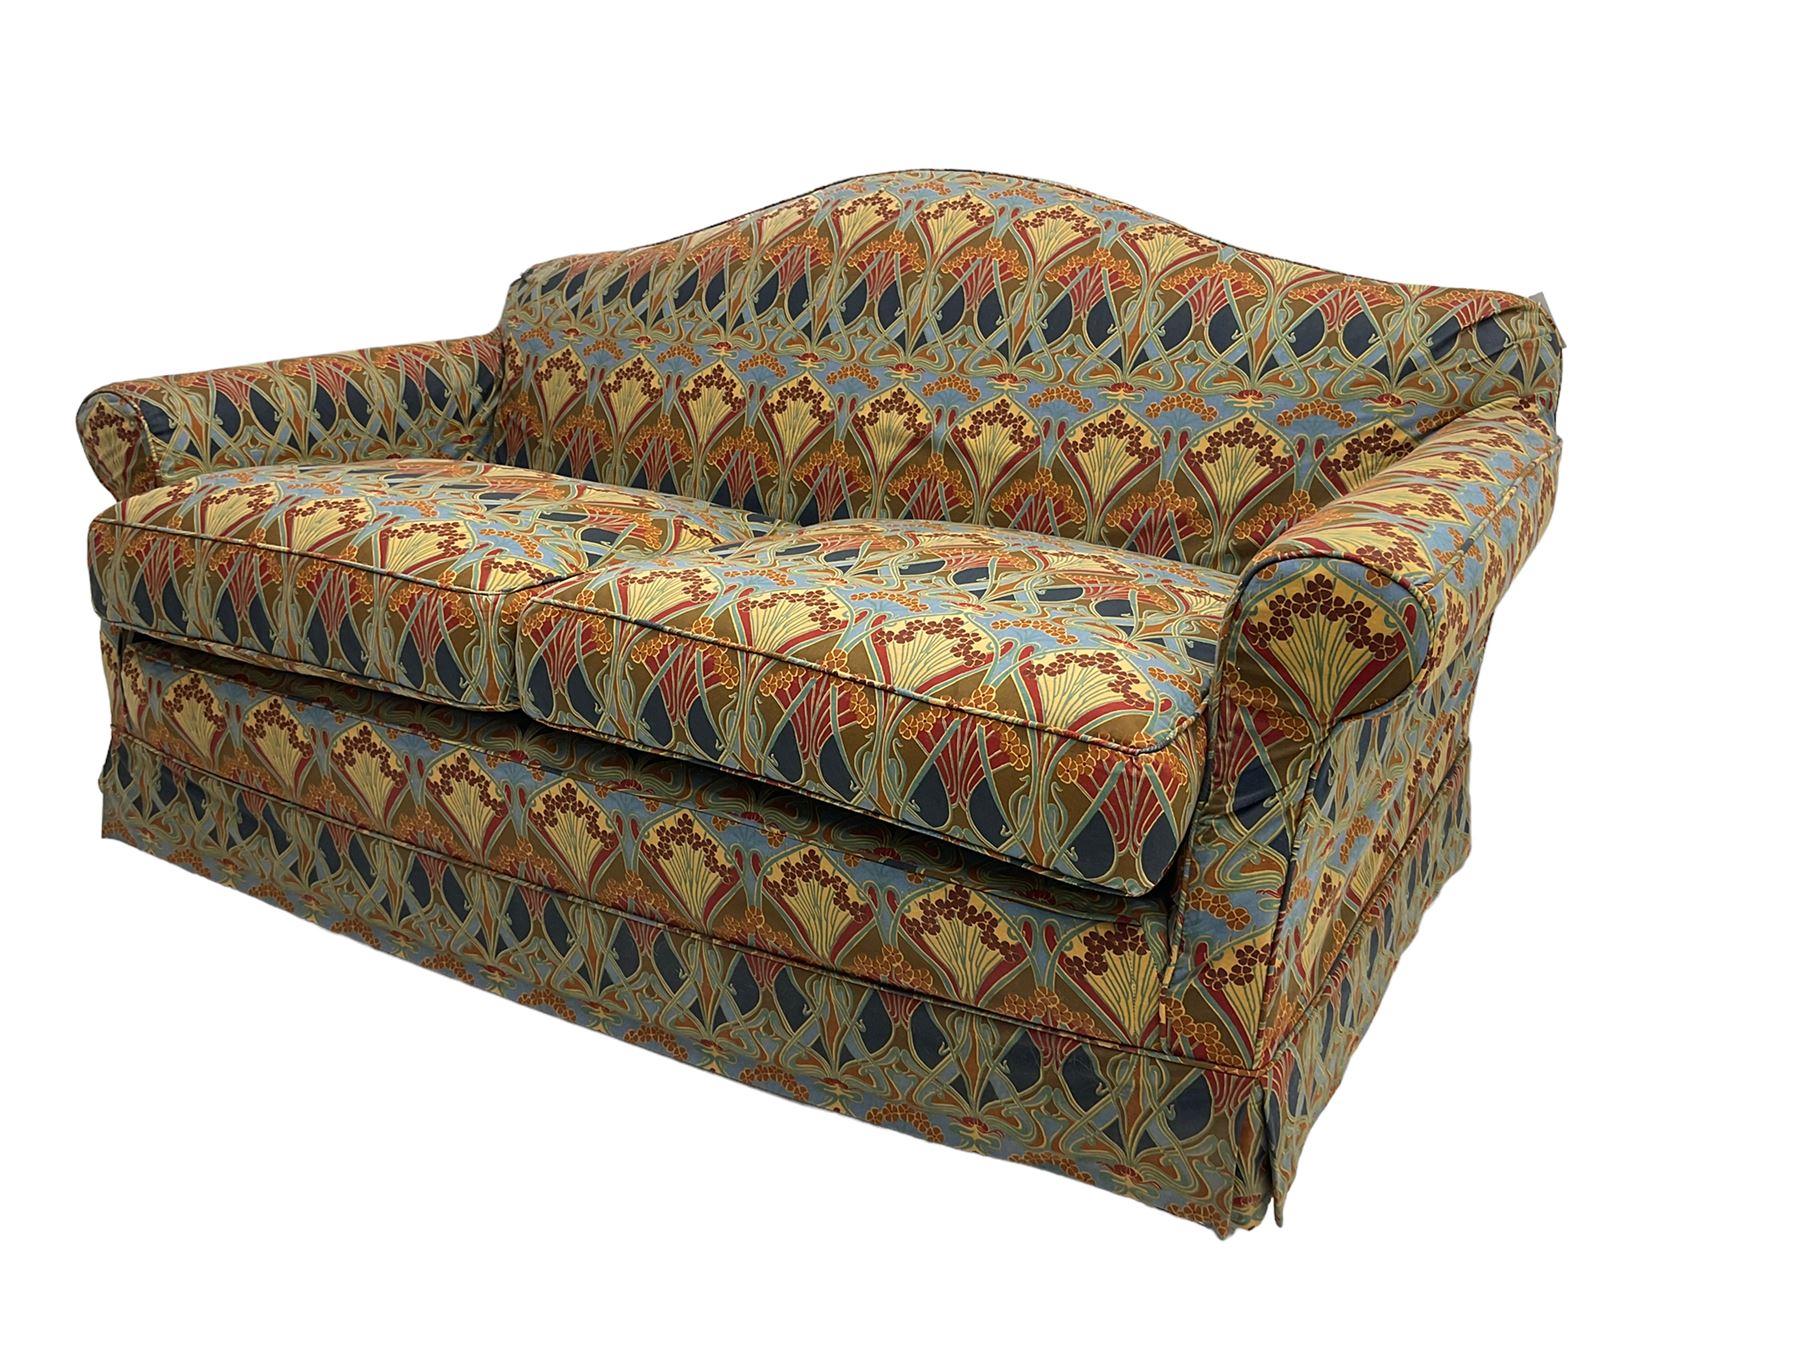 Two seat traditional shape sofa - Image 4 of 6